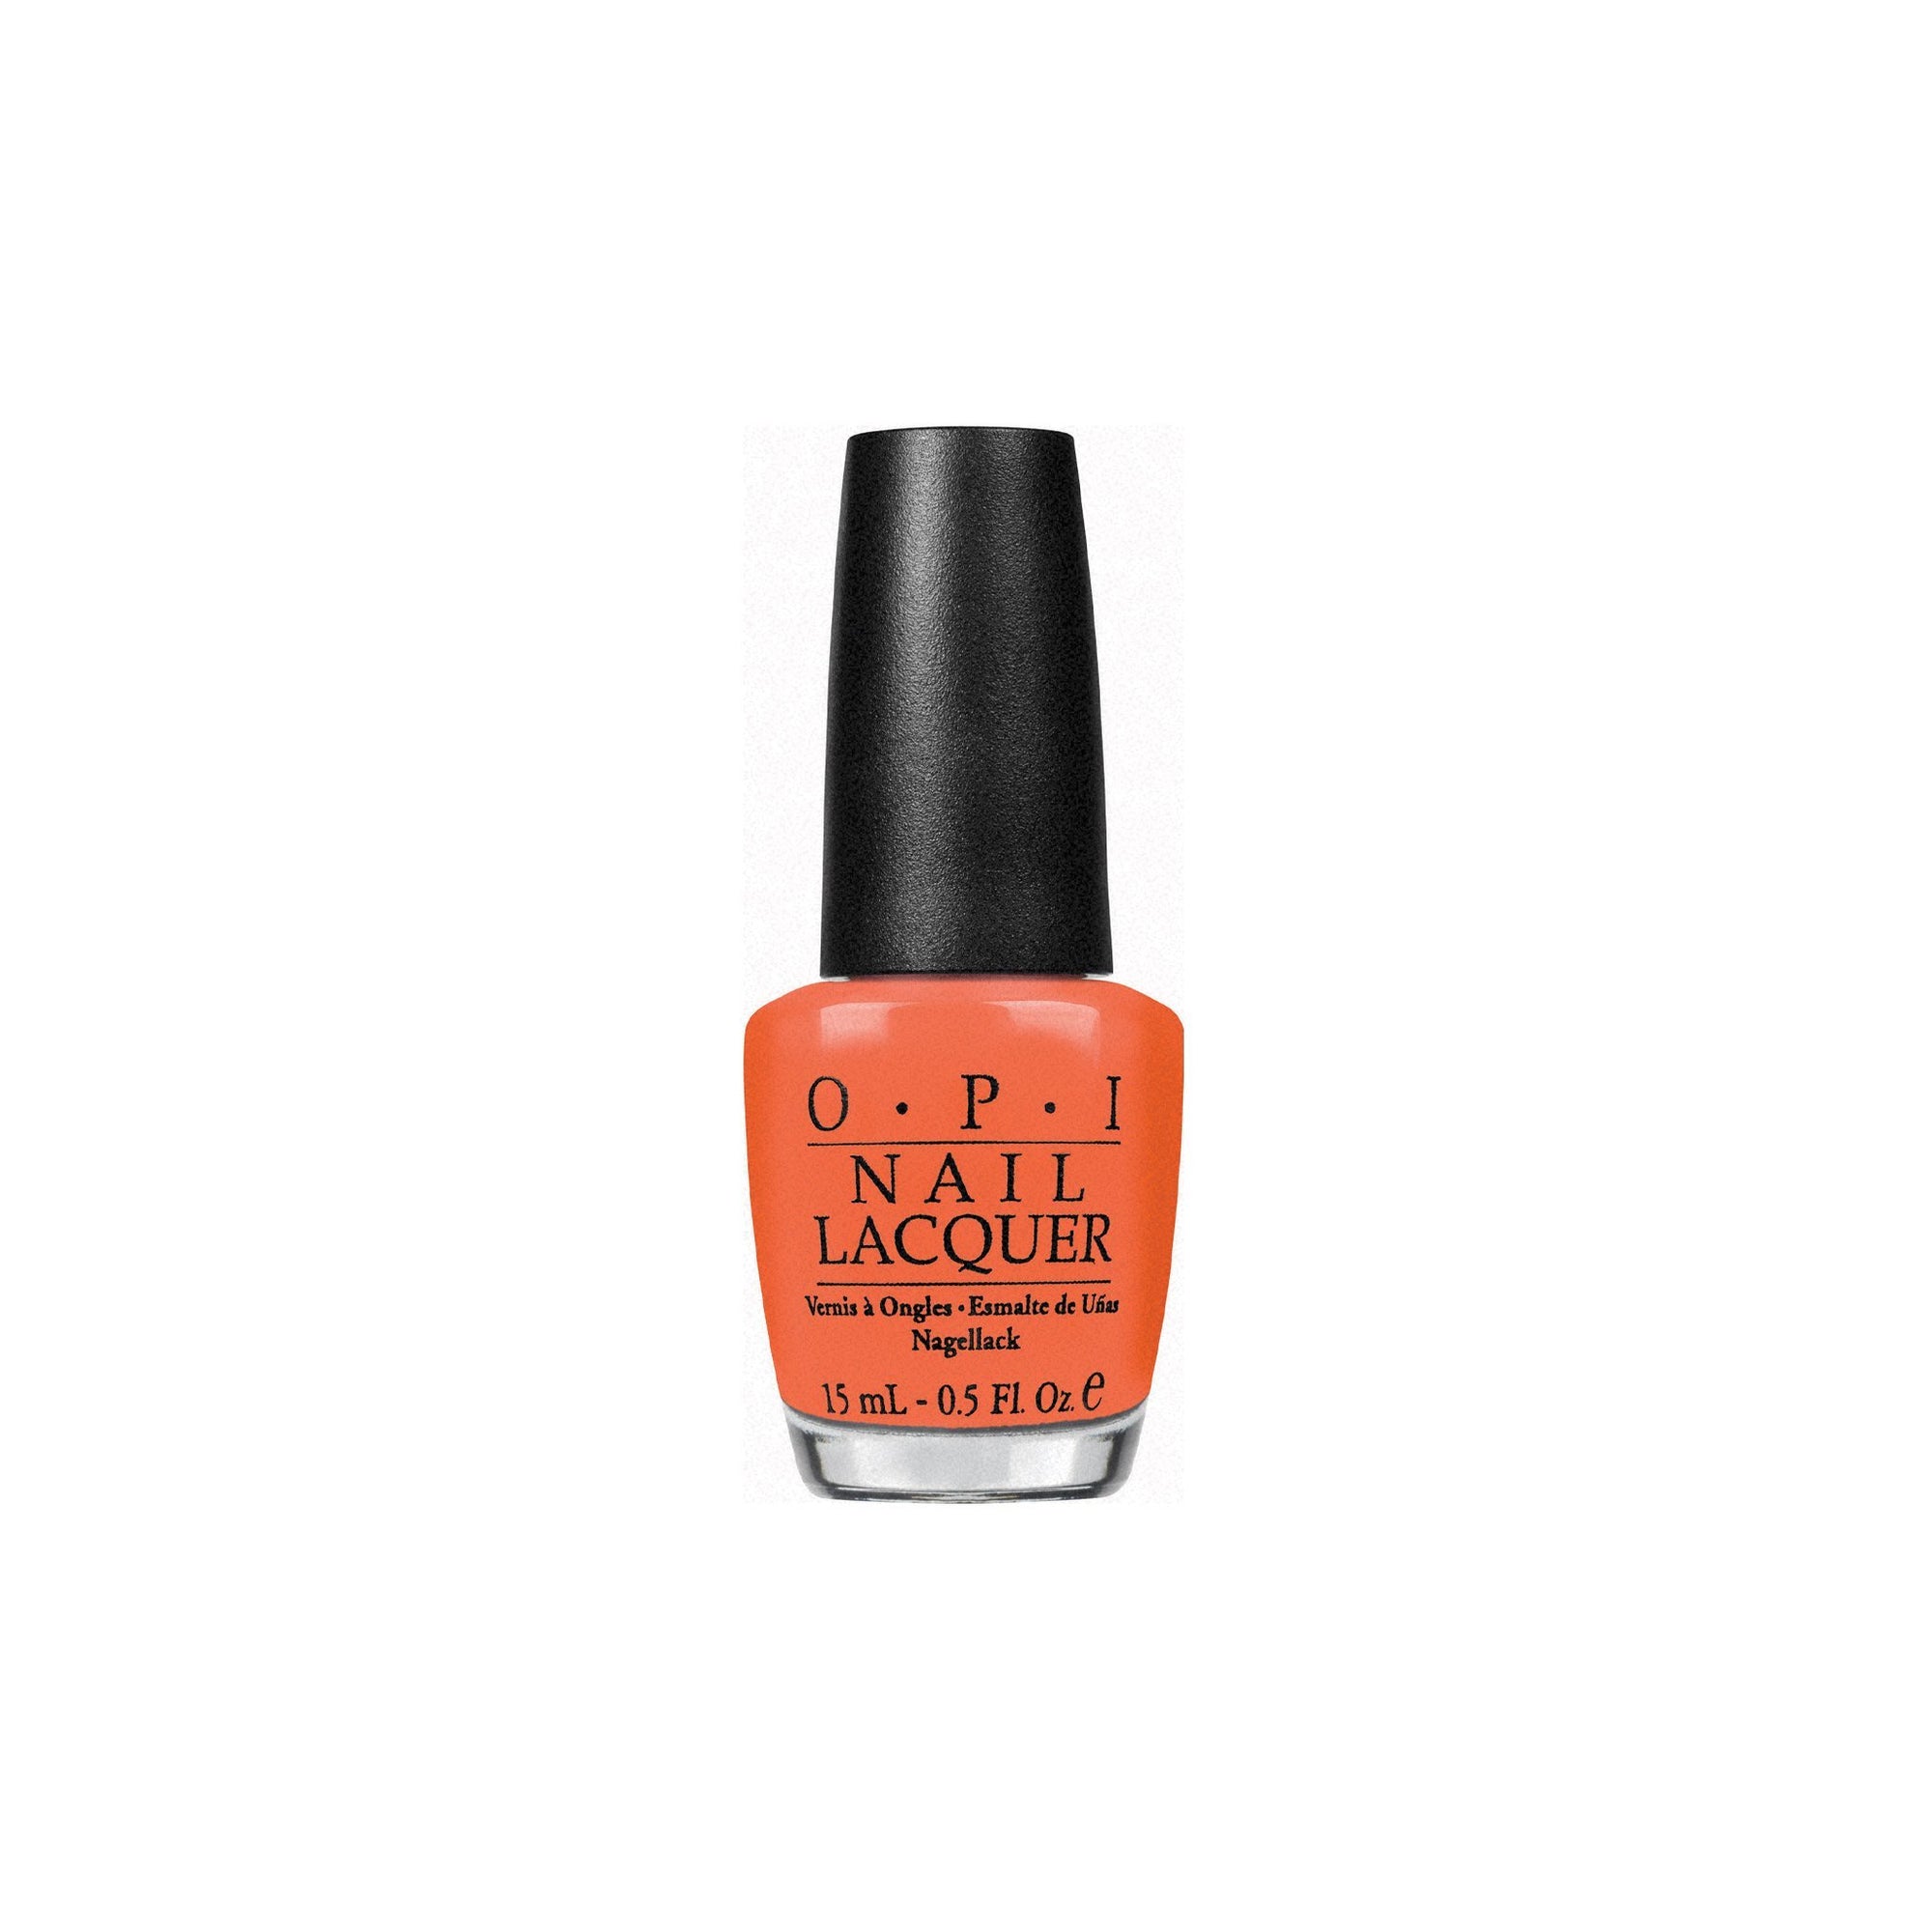 O.P.I Nail Lacquer - Hot & Spicy